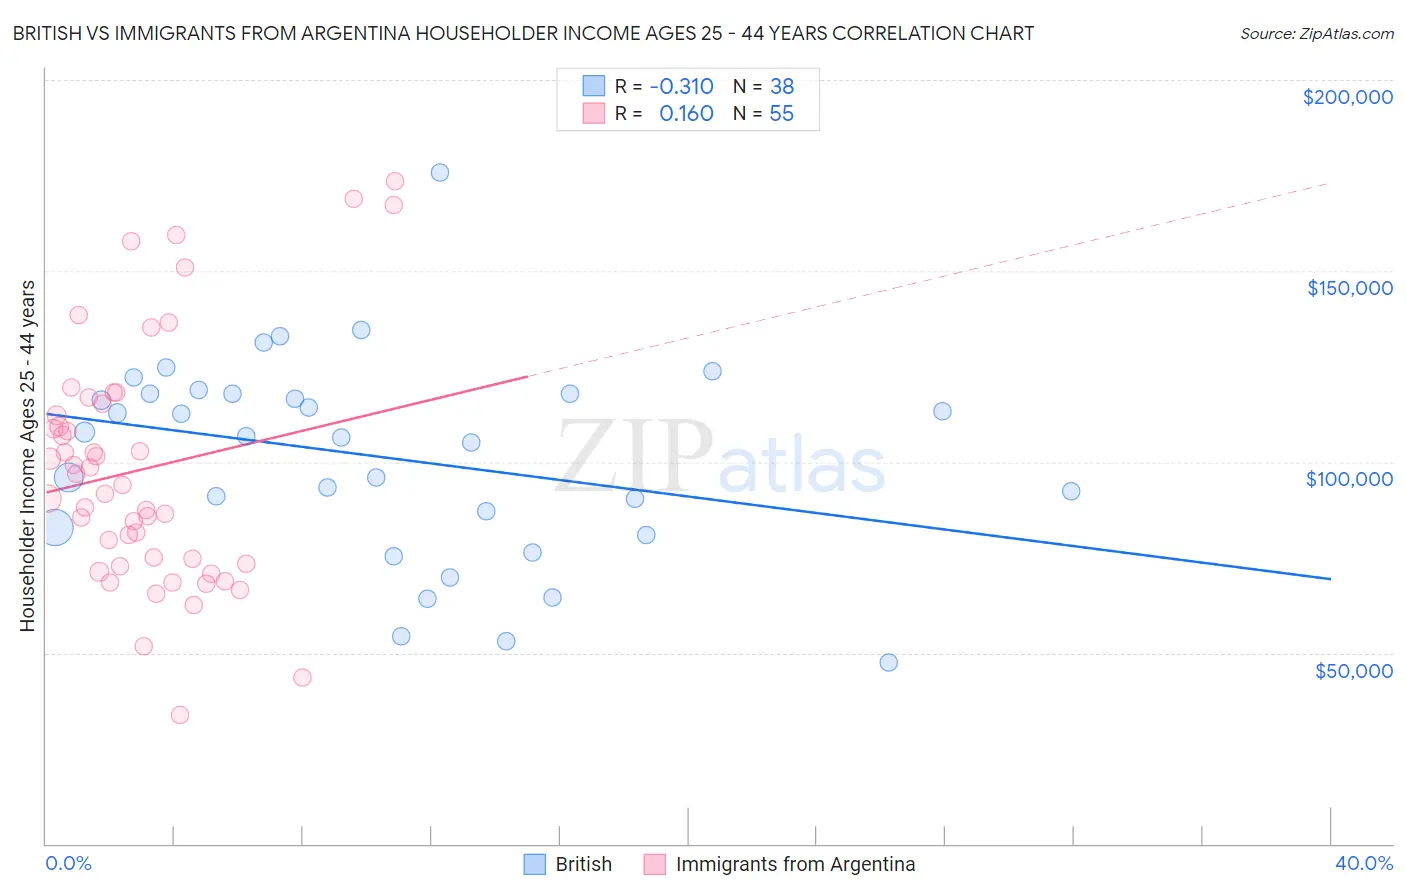 British vs Immigrants from Argentina Householder Income Ages 25 - 44 years